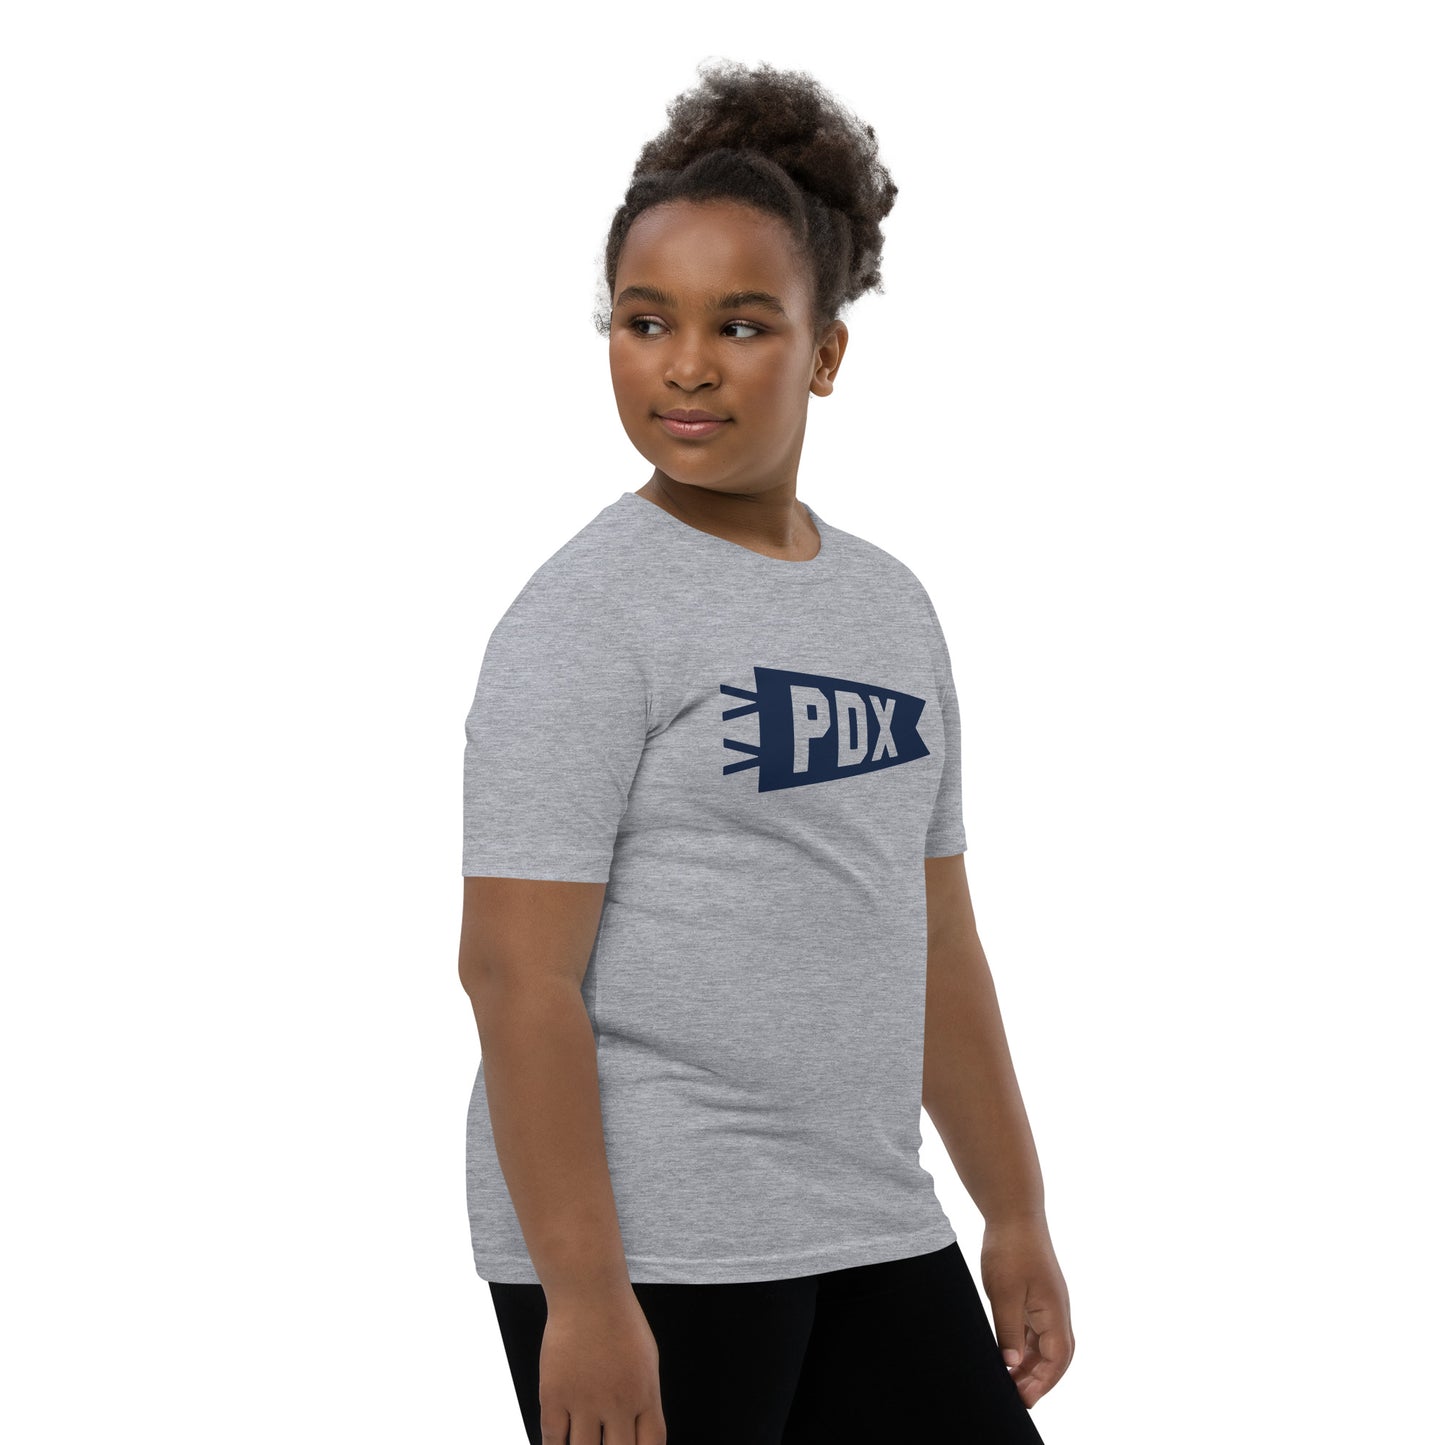 Kid's Airport Code Tee - Navy Blue Graphic • PDX Portland • YHM Designs - Image 03